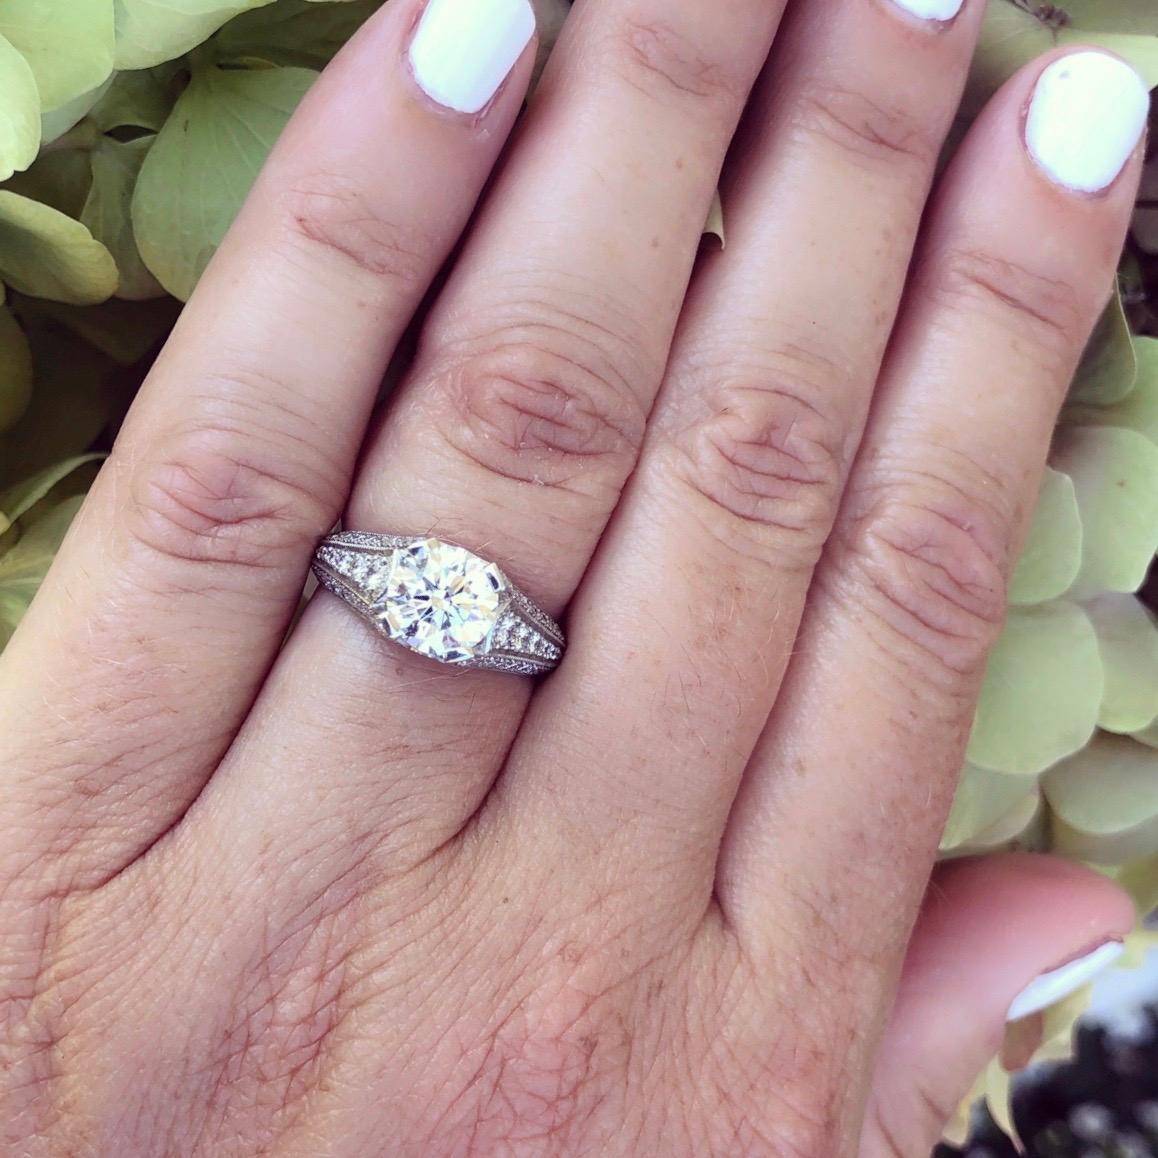 Modern day quality craftsmanship meets timeless design in this beautiful Custom French platinum ring features a 1.55ct round brilliant cut diamond with G color and VS1 clarity accented by 60 round brilliant cut diamonds for approximately 0.73cts.